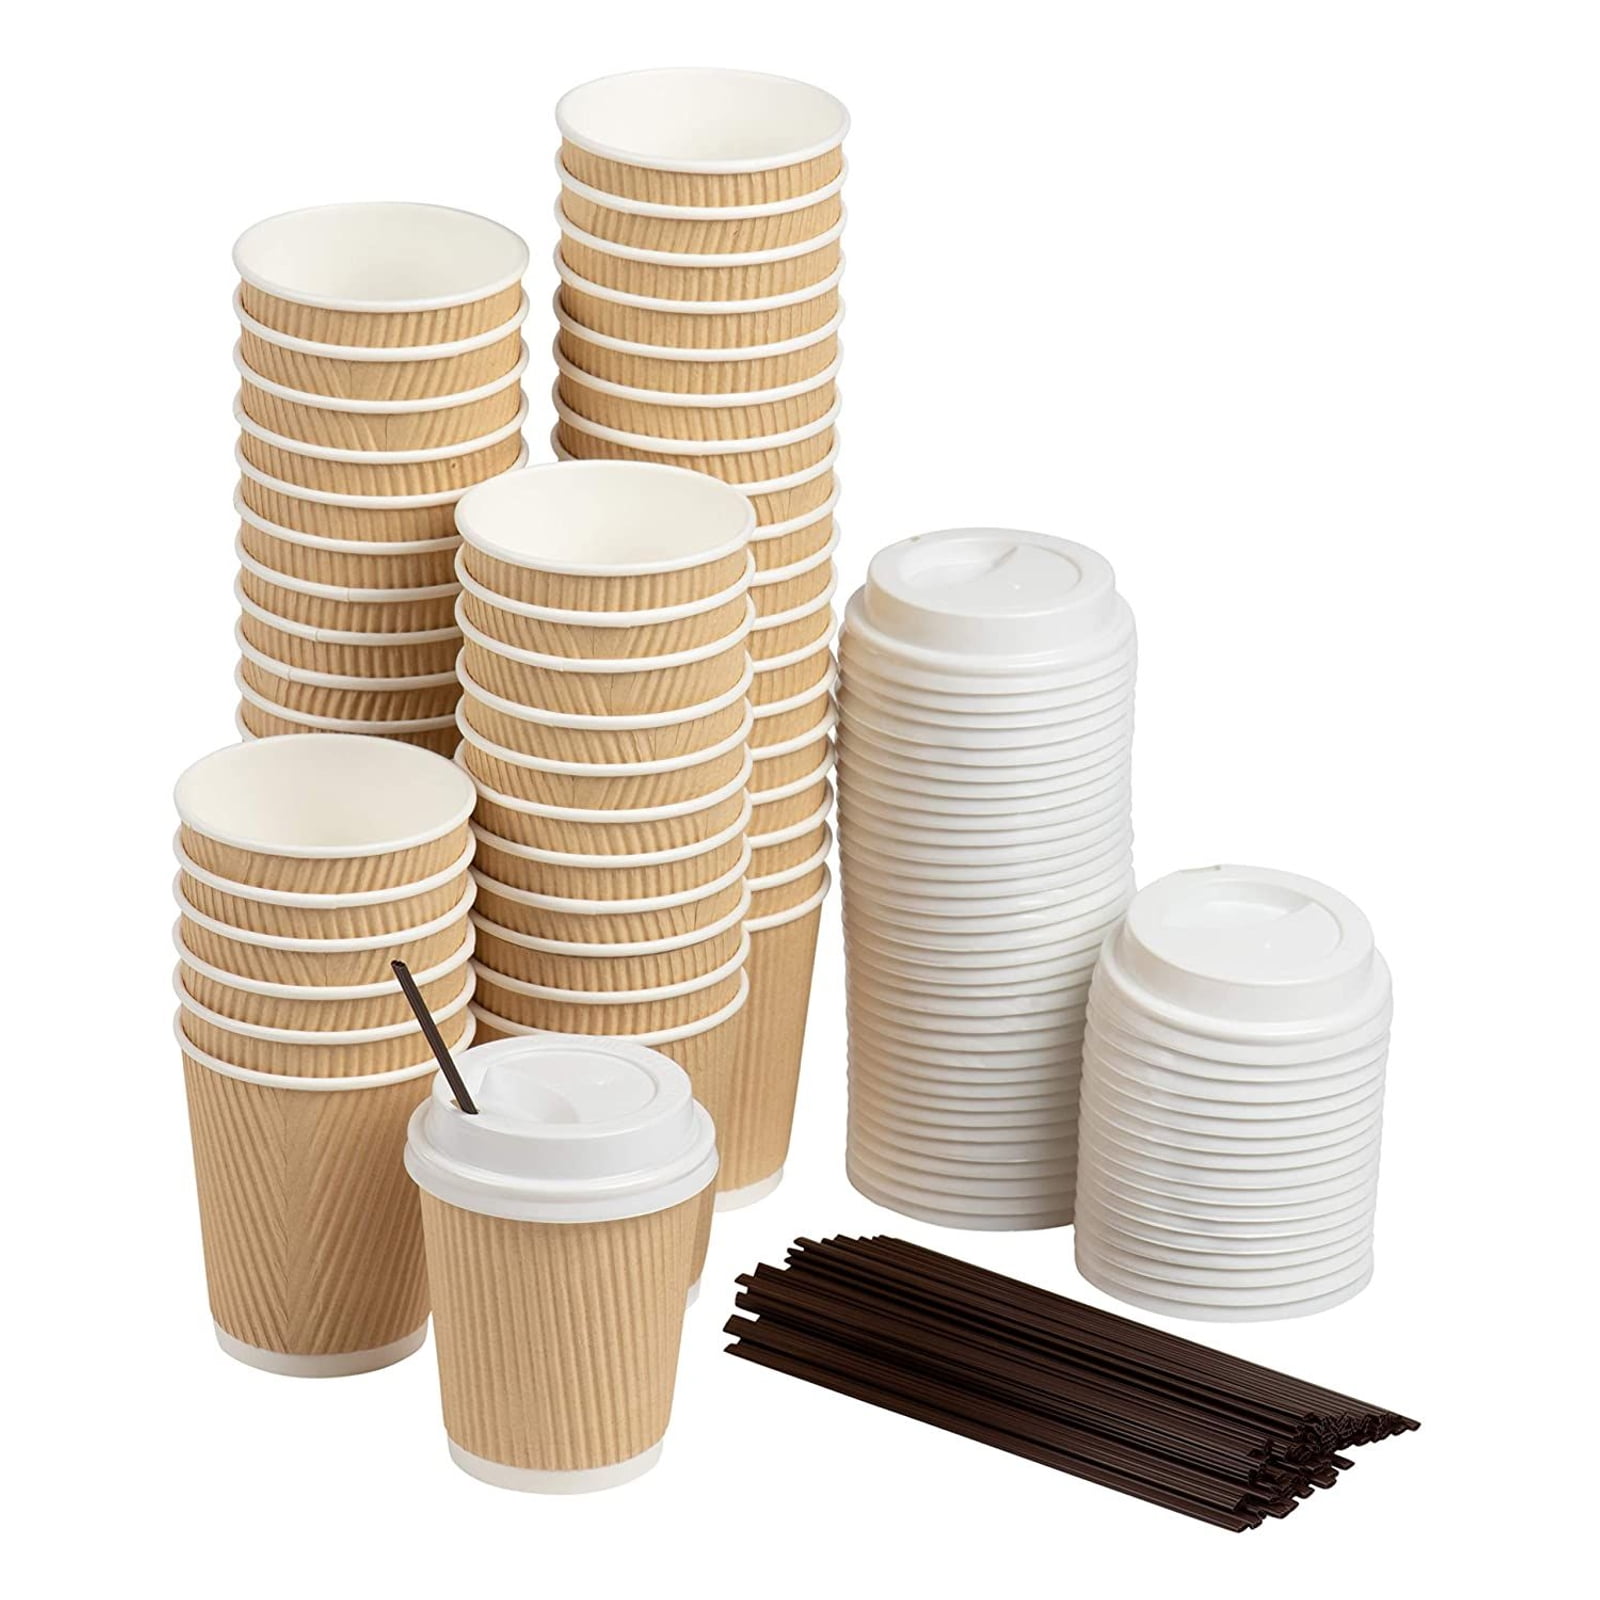 Details about   Set of 150 Ripple Insulated Kraft 6-oz Paper Cups Coffee/Tea Hot Cups ...